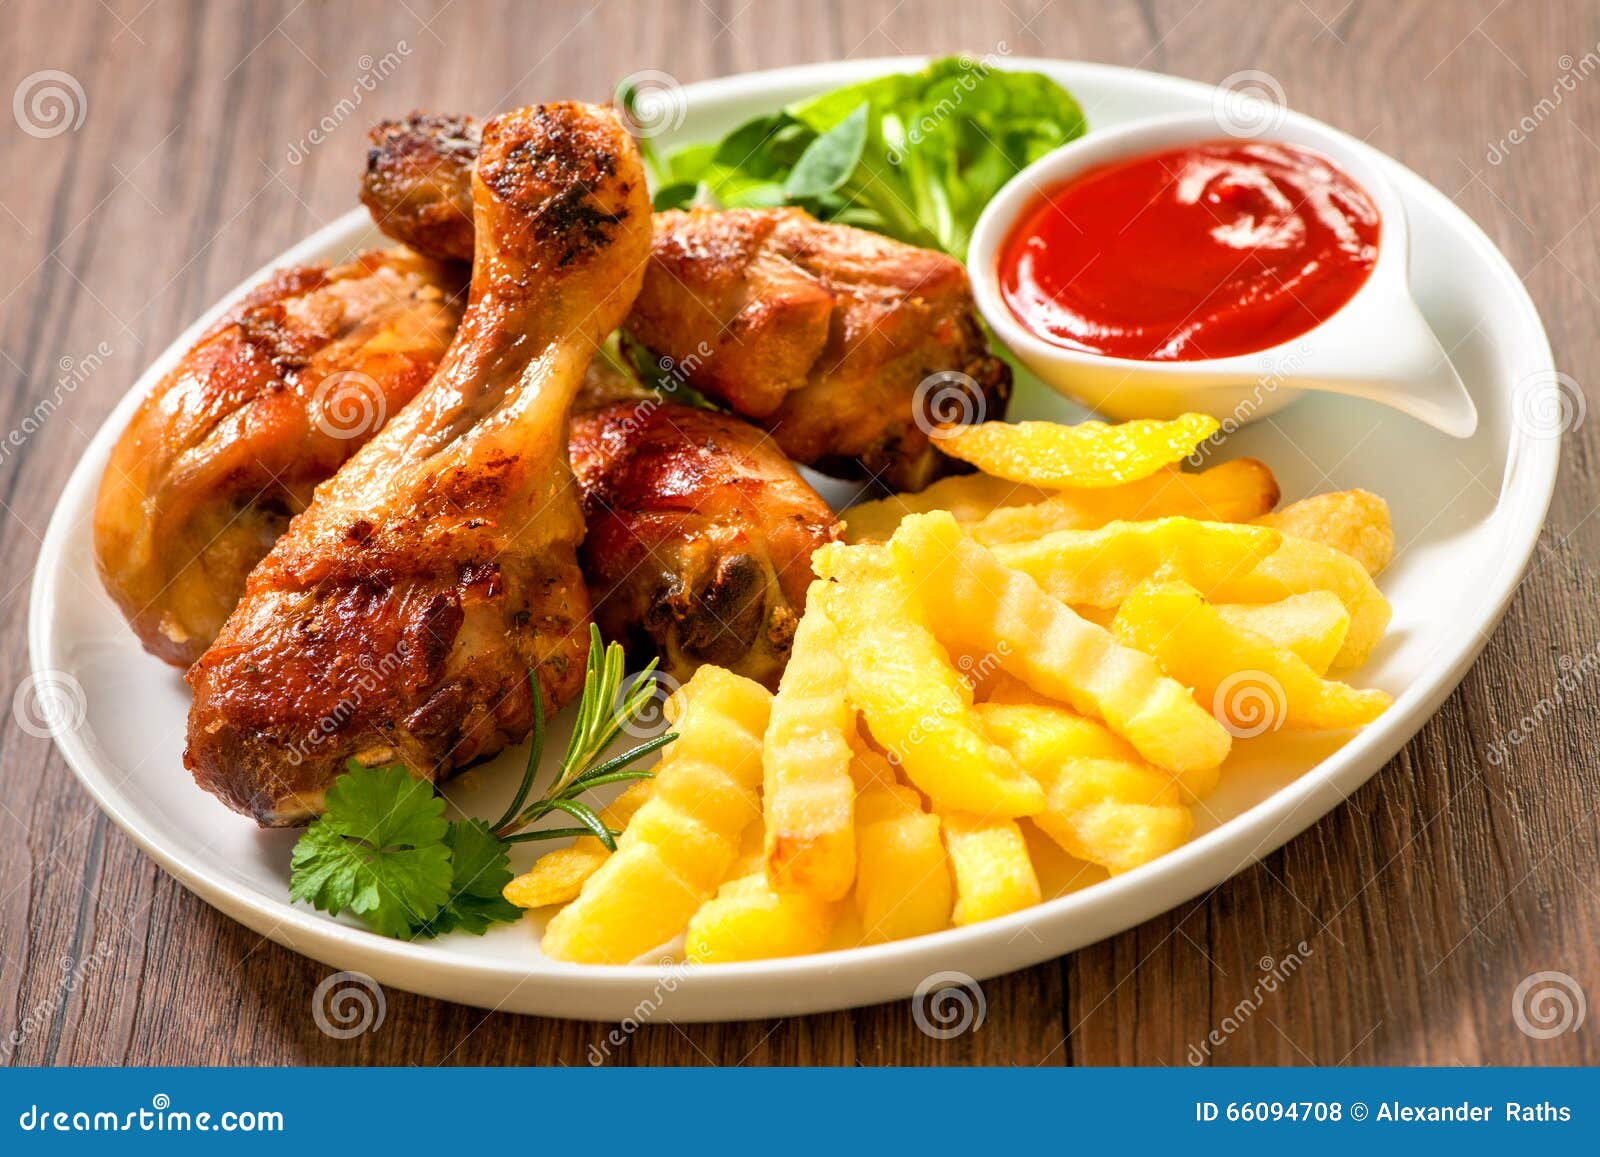 Grilled Chicken with French Fries Stock Photo - Image of grill, diet ...